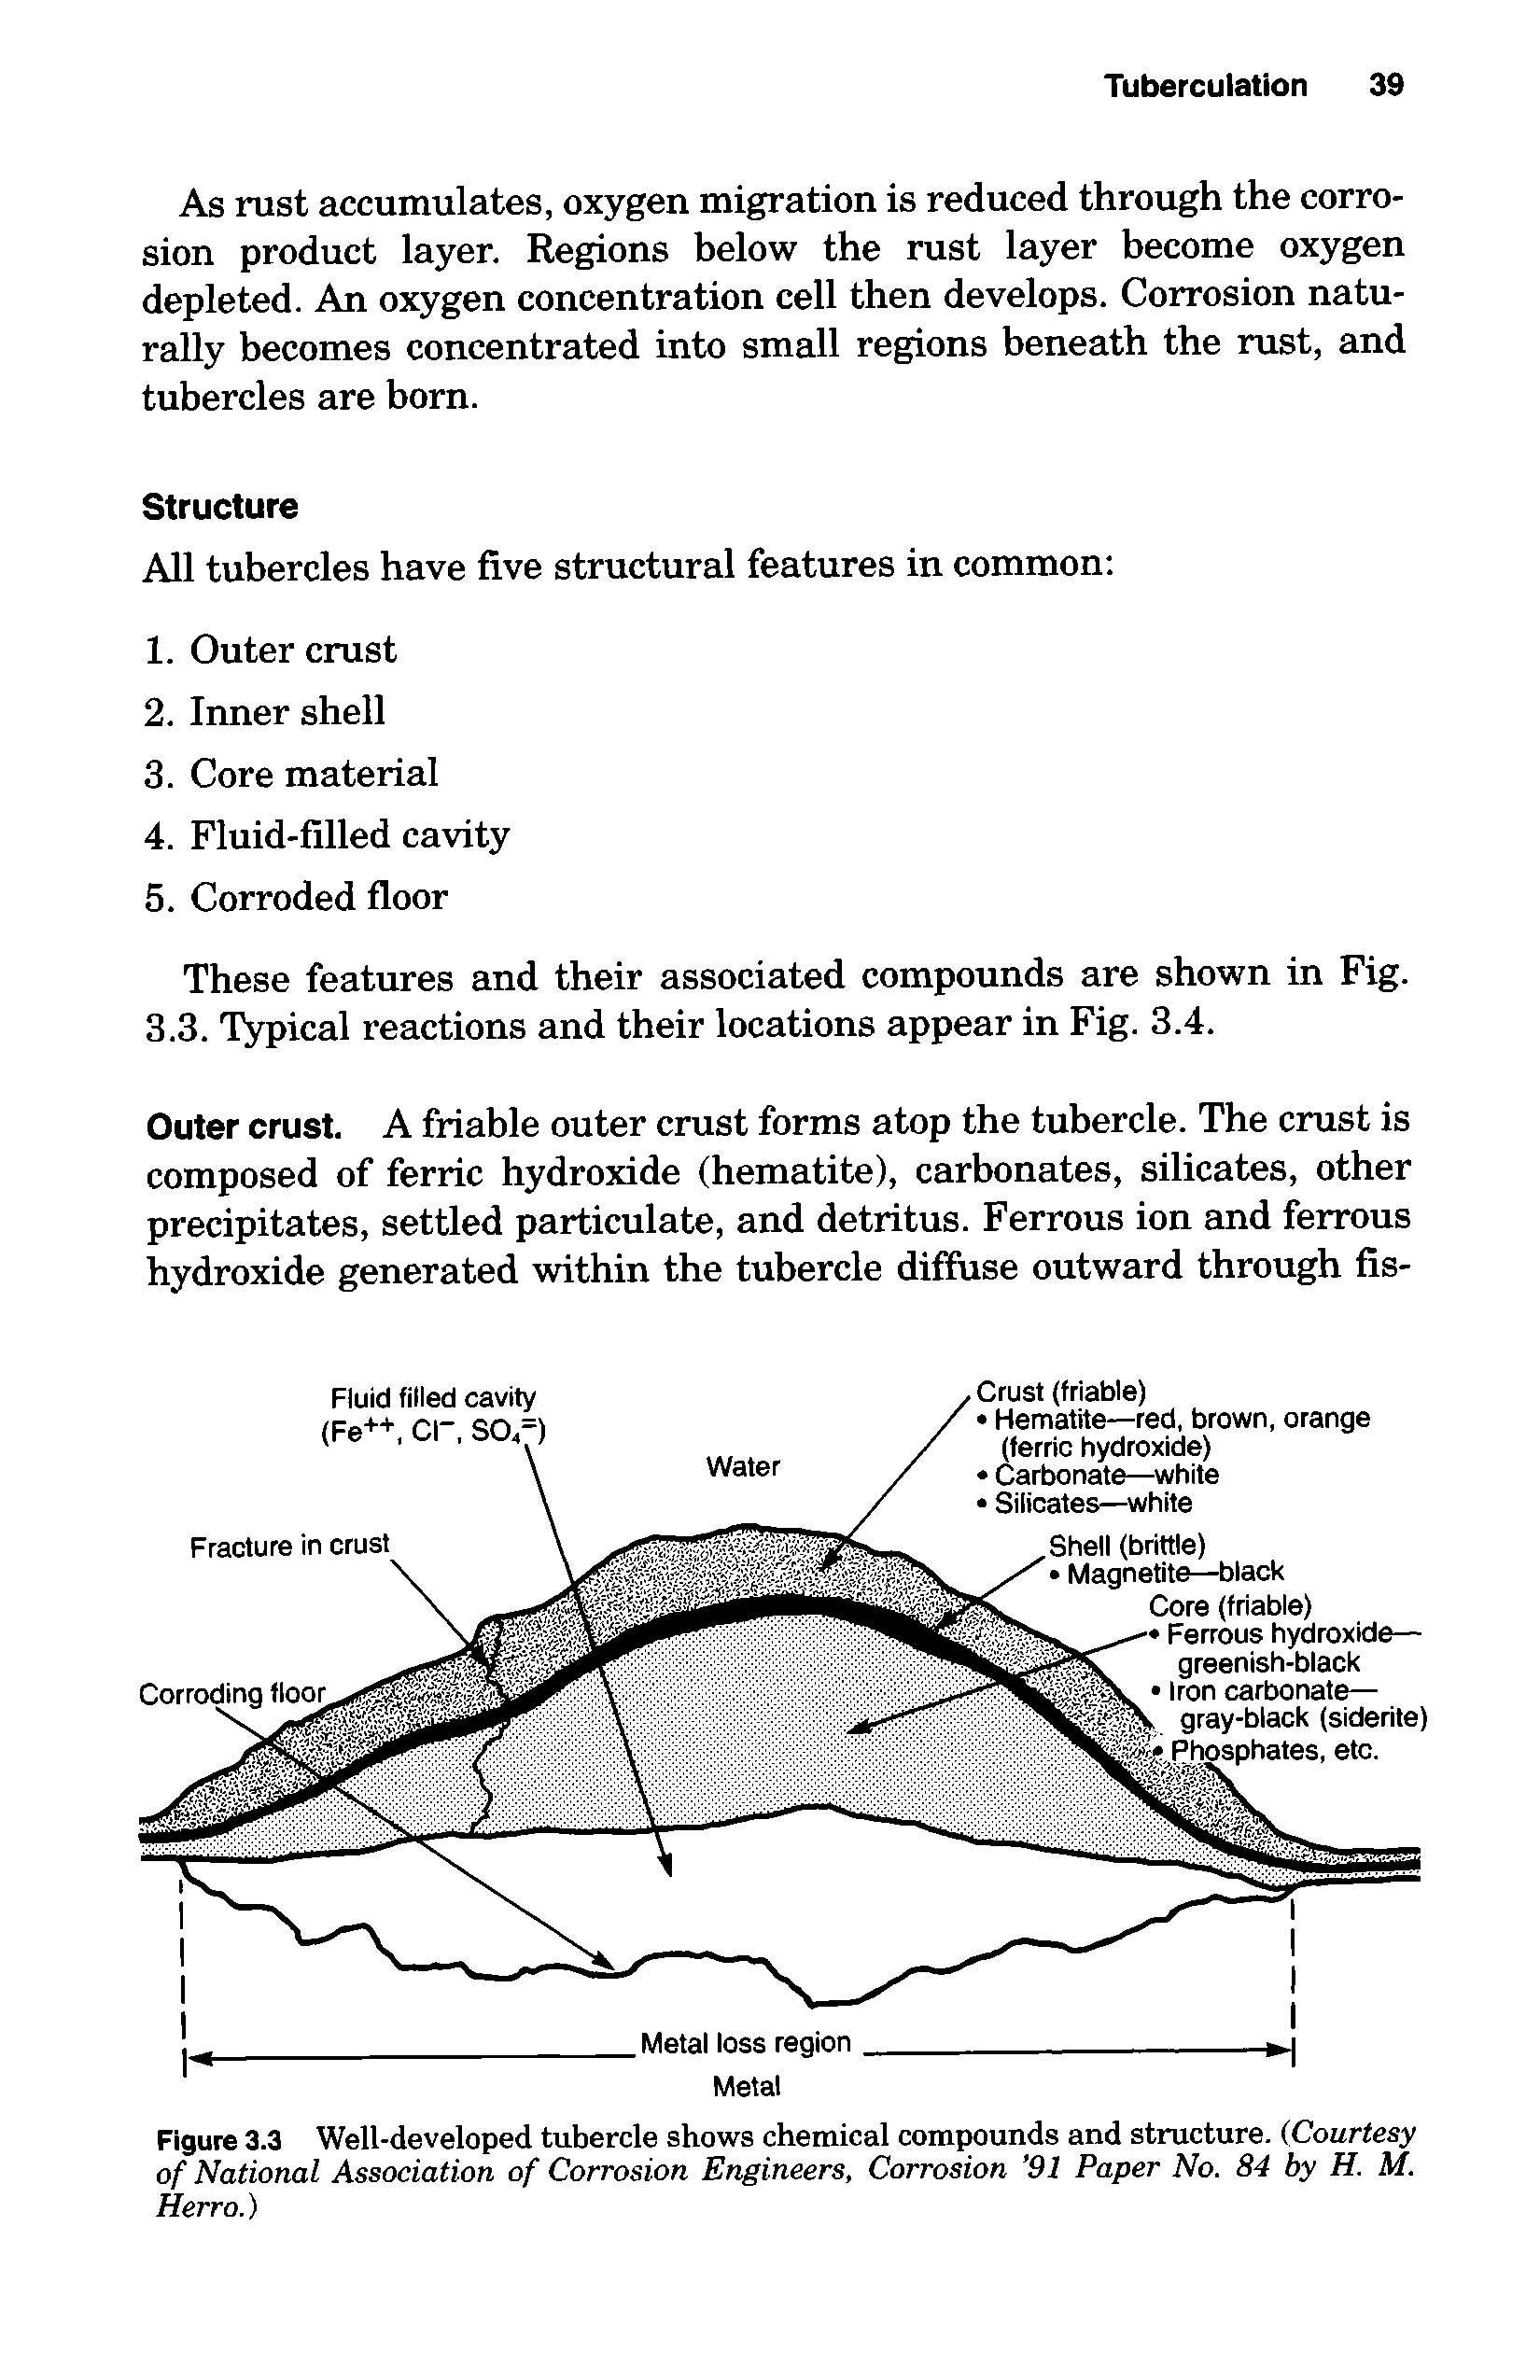 Figure 3.3 Well-developed tubercle shows chemical compounds and structure. (Courtesy of National Association of Corrosion Engineers, Corrosion 91 Paper No. 84 by H. M. Herro.)...